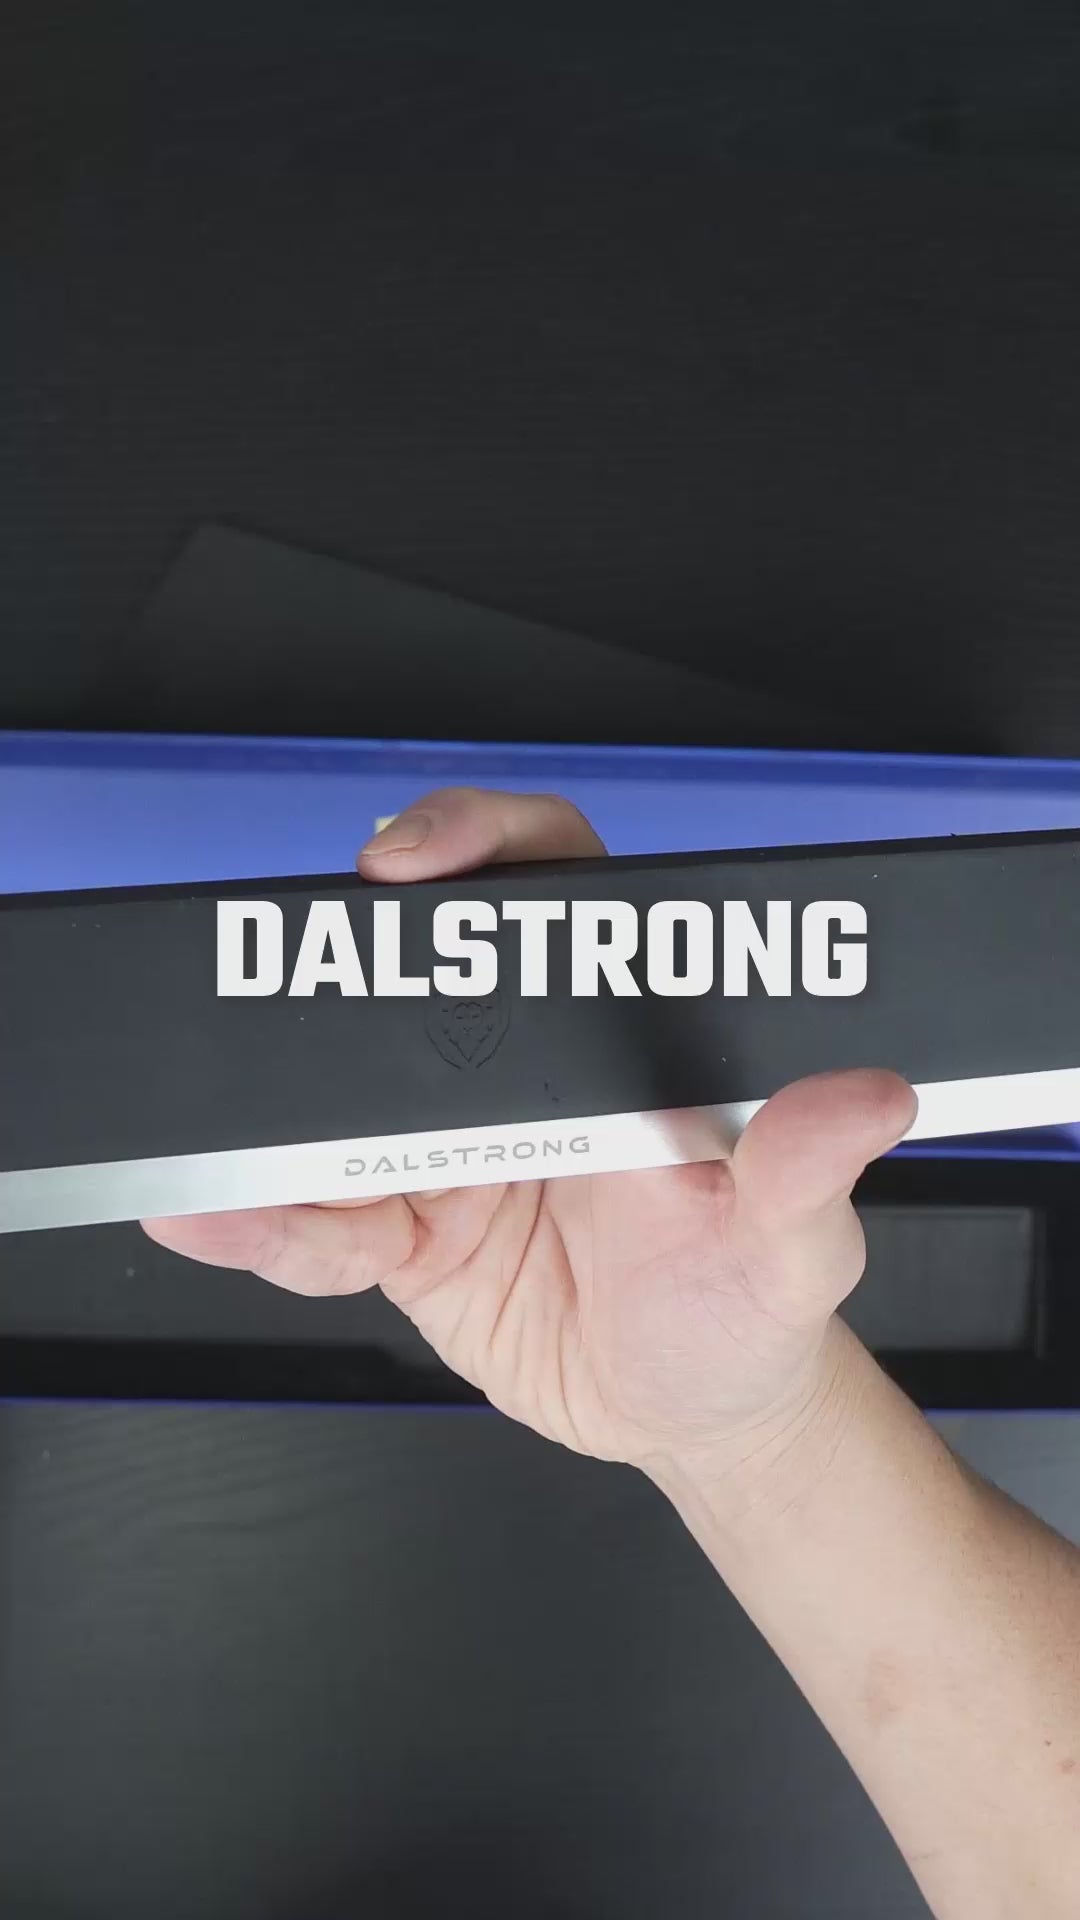 Unboxing the Dalstrong magnetic bar silicone wall knife holder.